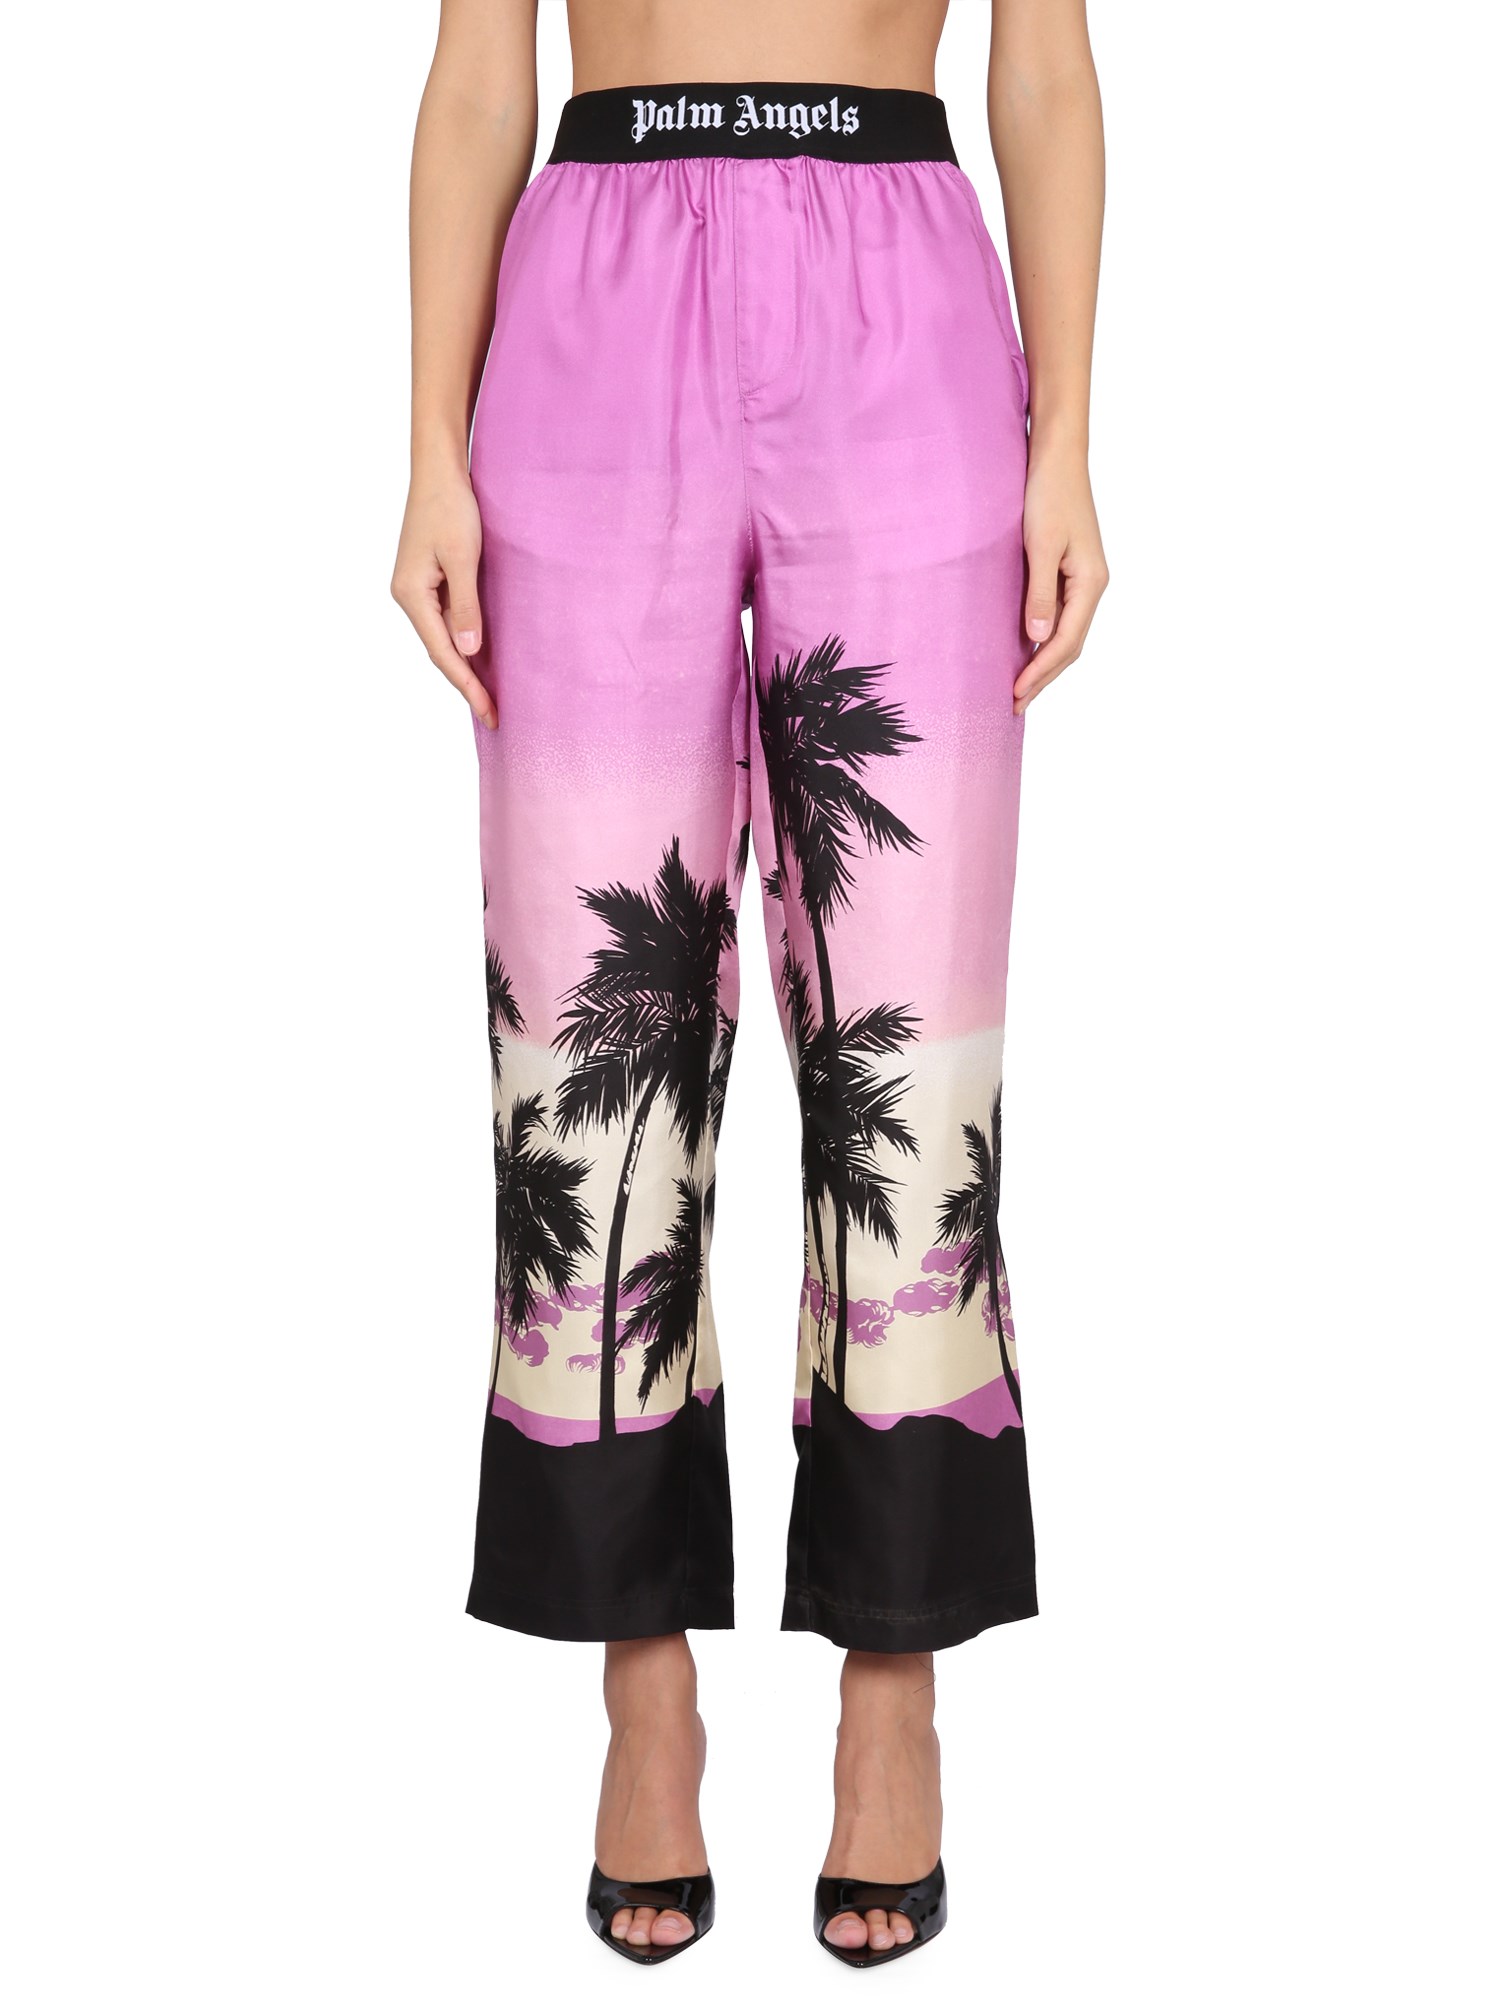 palm angels pants with sunset print